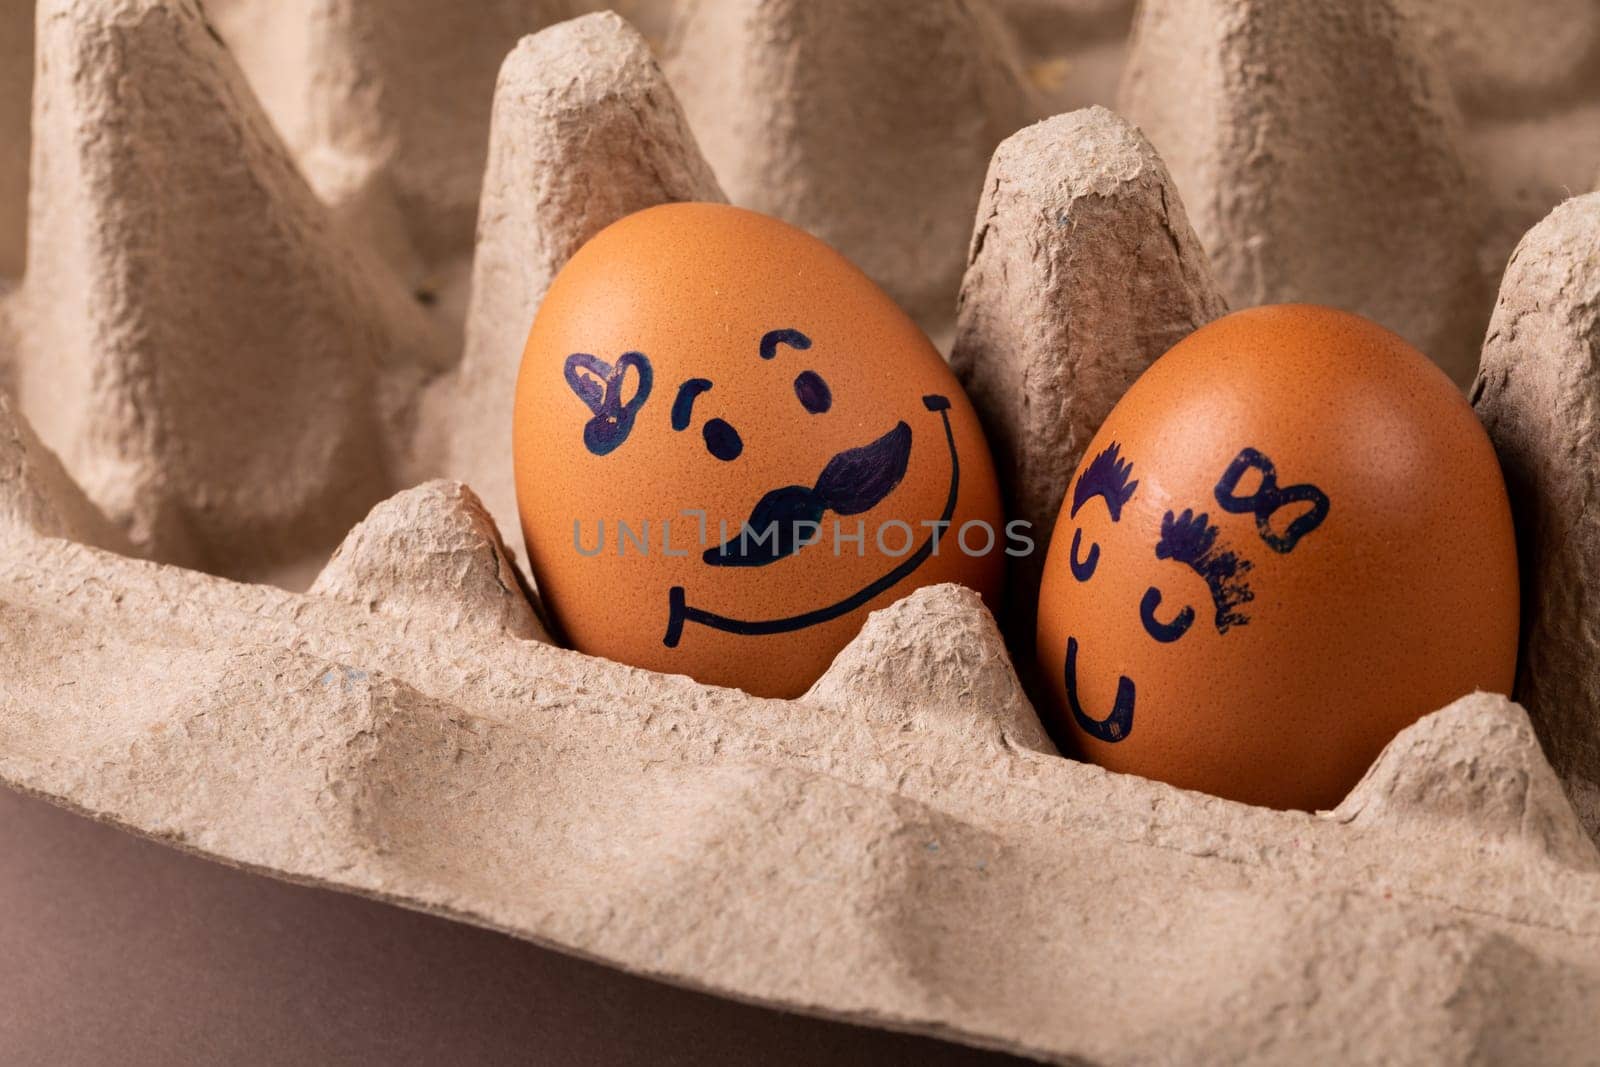 Close-up of creative drawing on brown eggs in carton. unaltered, food, healthy eating, creative, humor concept.